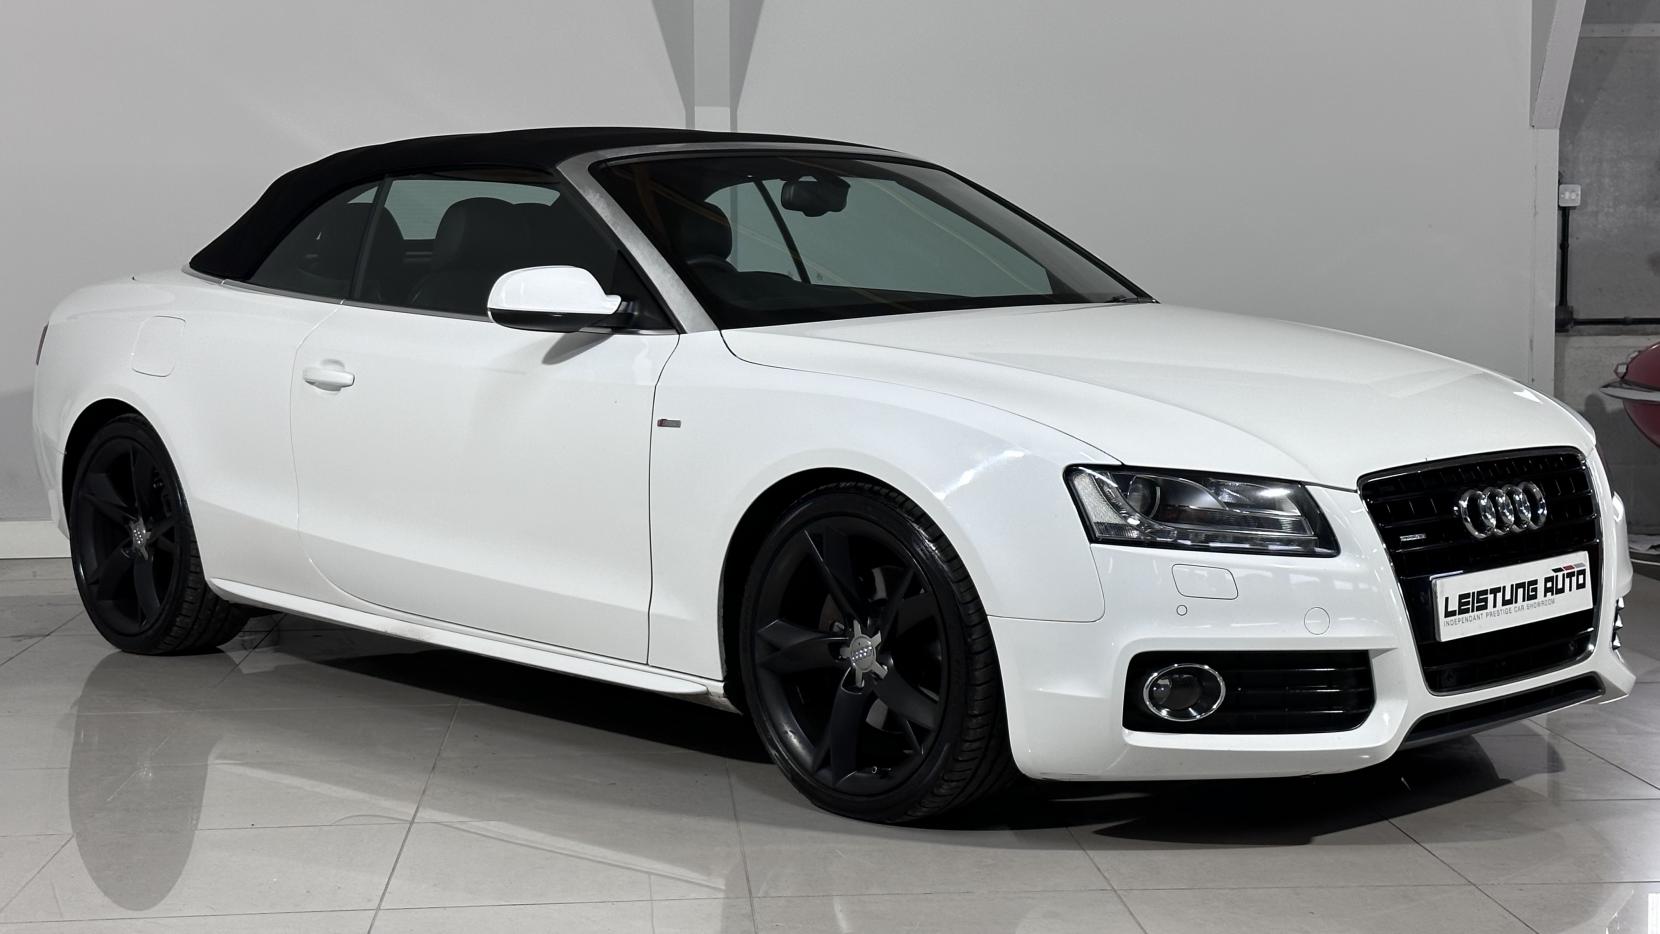 Audi A5 Cabriolet 3.0 TDI V6 S line Convertible 2dr Diesel S Tronic quattro Euro 4 (240 ps)